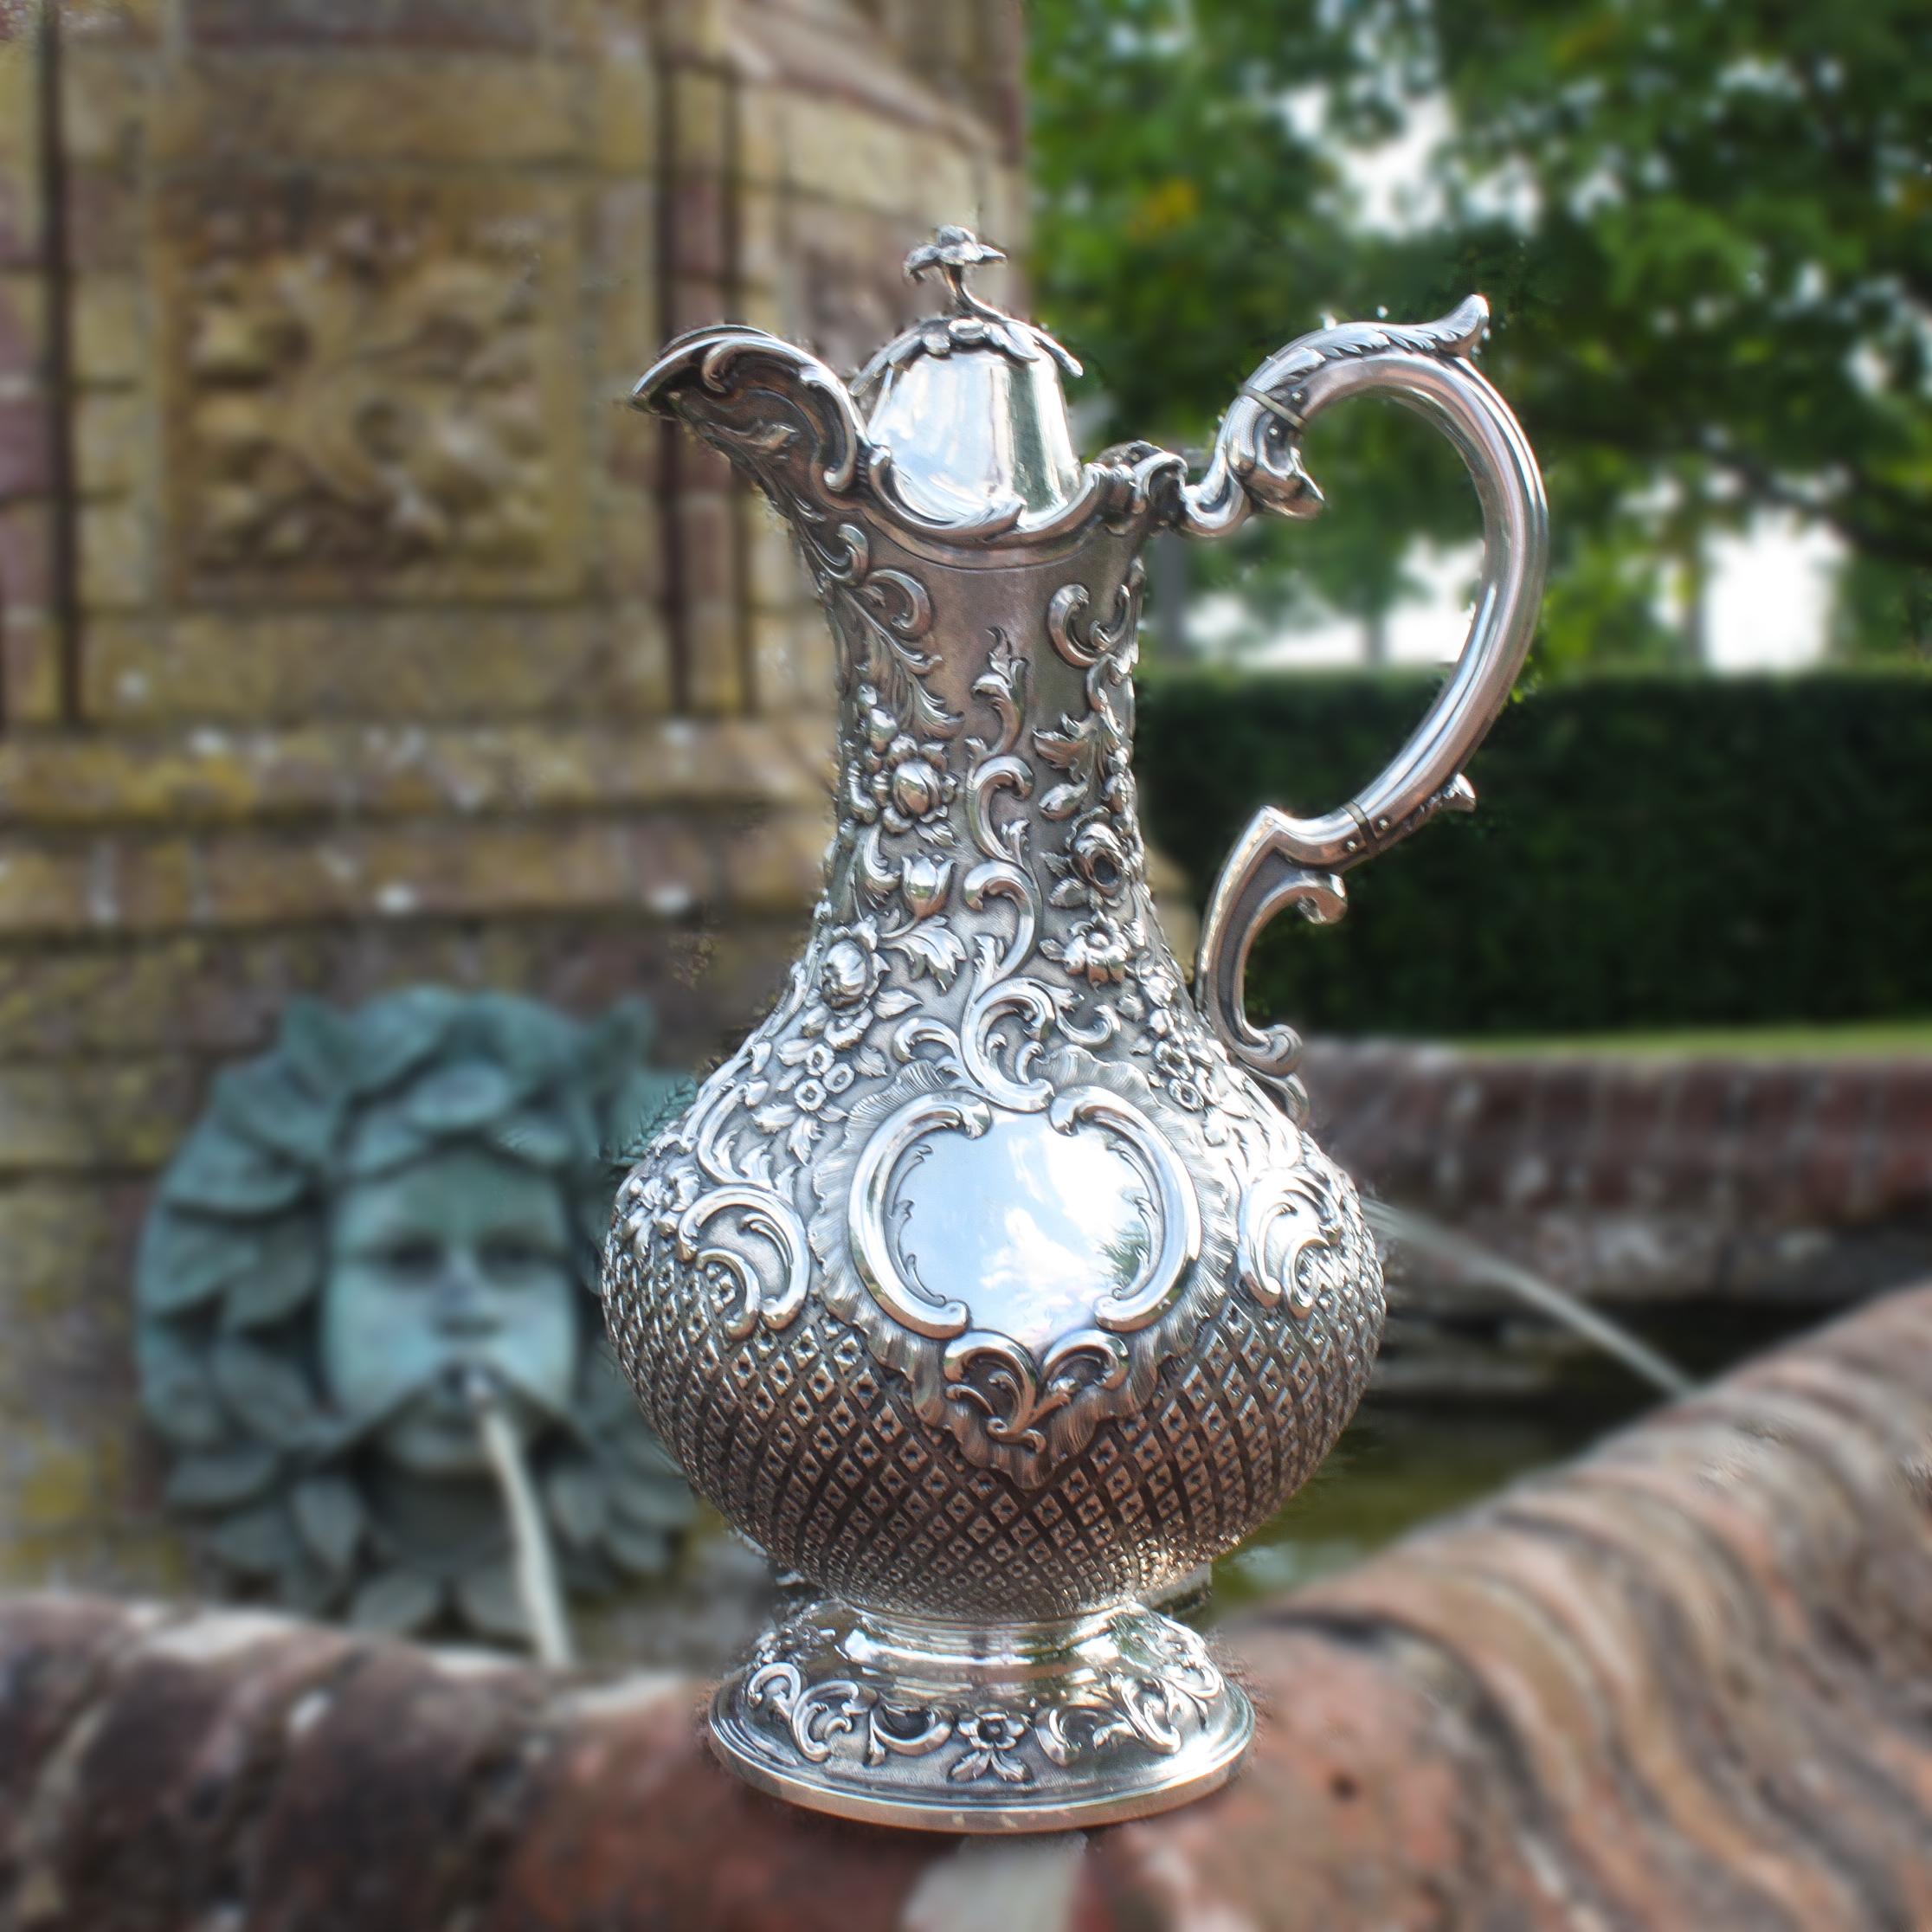 Antique Victorian sterling silver pitcher or ewer.
Made in Glasgow 1853
Maker: William Clarke Shaw
Fully hallmarked.

Dimensions:
Length 20 cm
Width 16 cm 
Height 31.5 cm
Weight: 1076 grams

Condition: General wear and tear, excellent